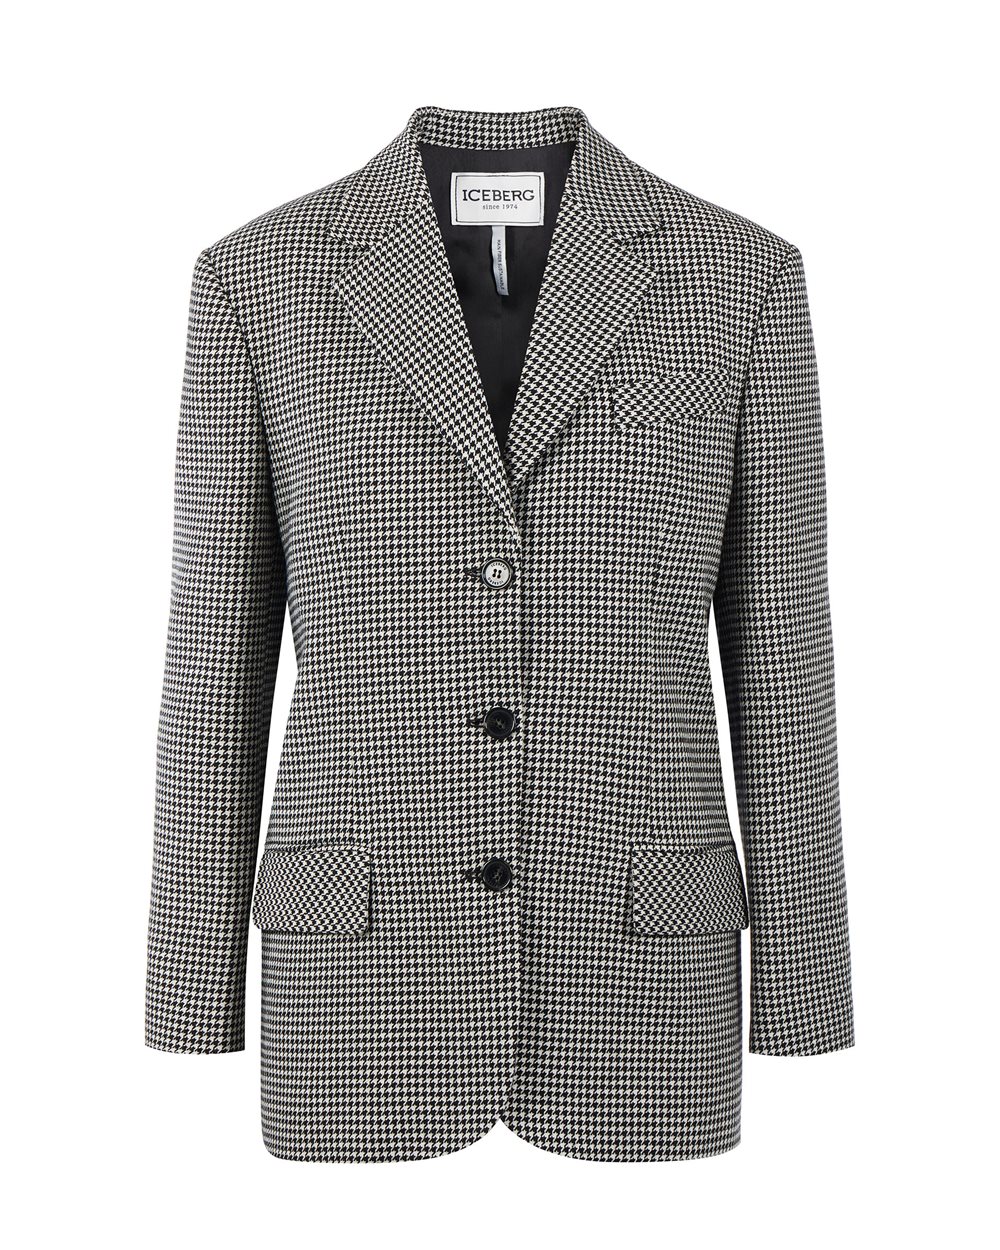 Single-breasted jacket with pied de poule pattern | Iceberg - Official Website